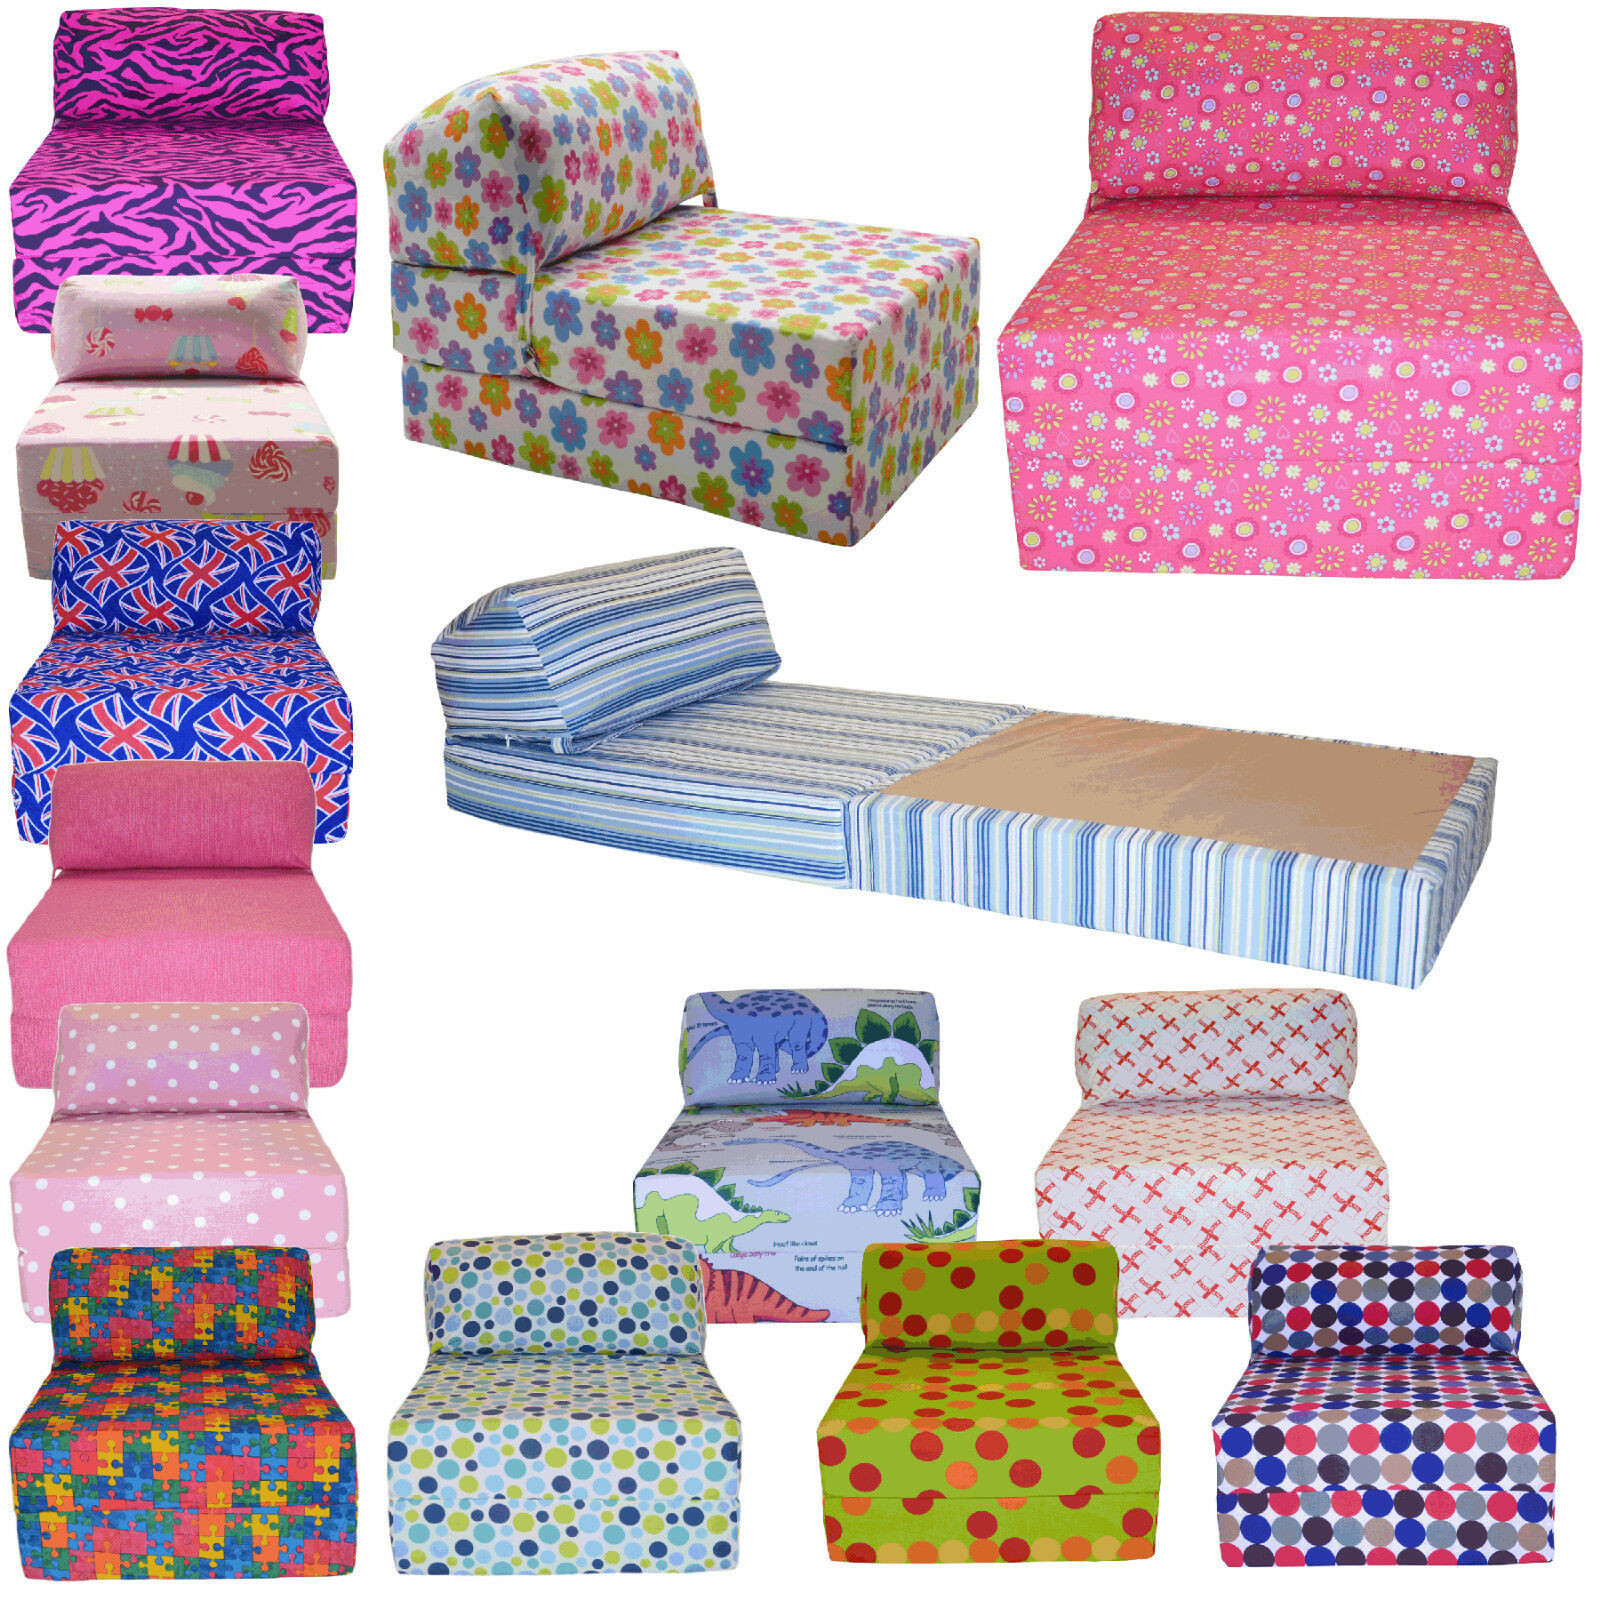 Kids Fold Out Chair Bed
 Cotton Print Single Chair Bed Z Guest Fold Out Futon Sofa